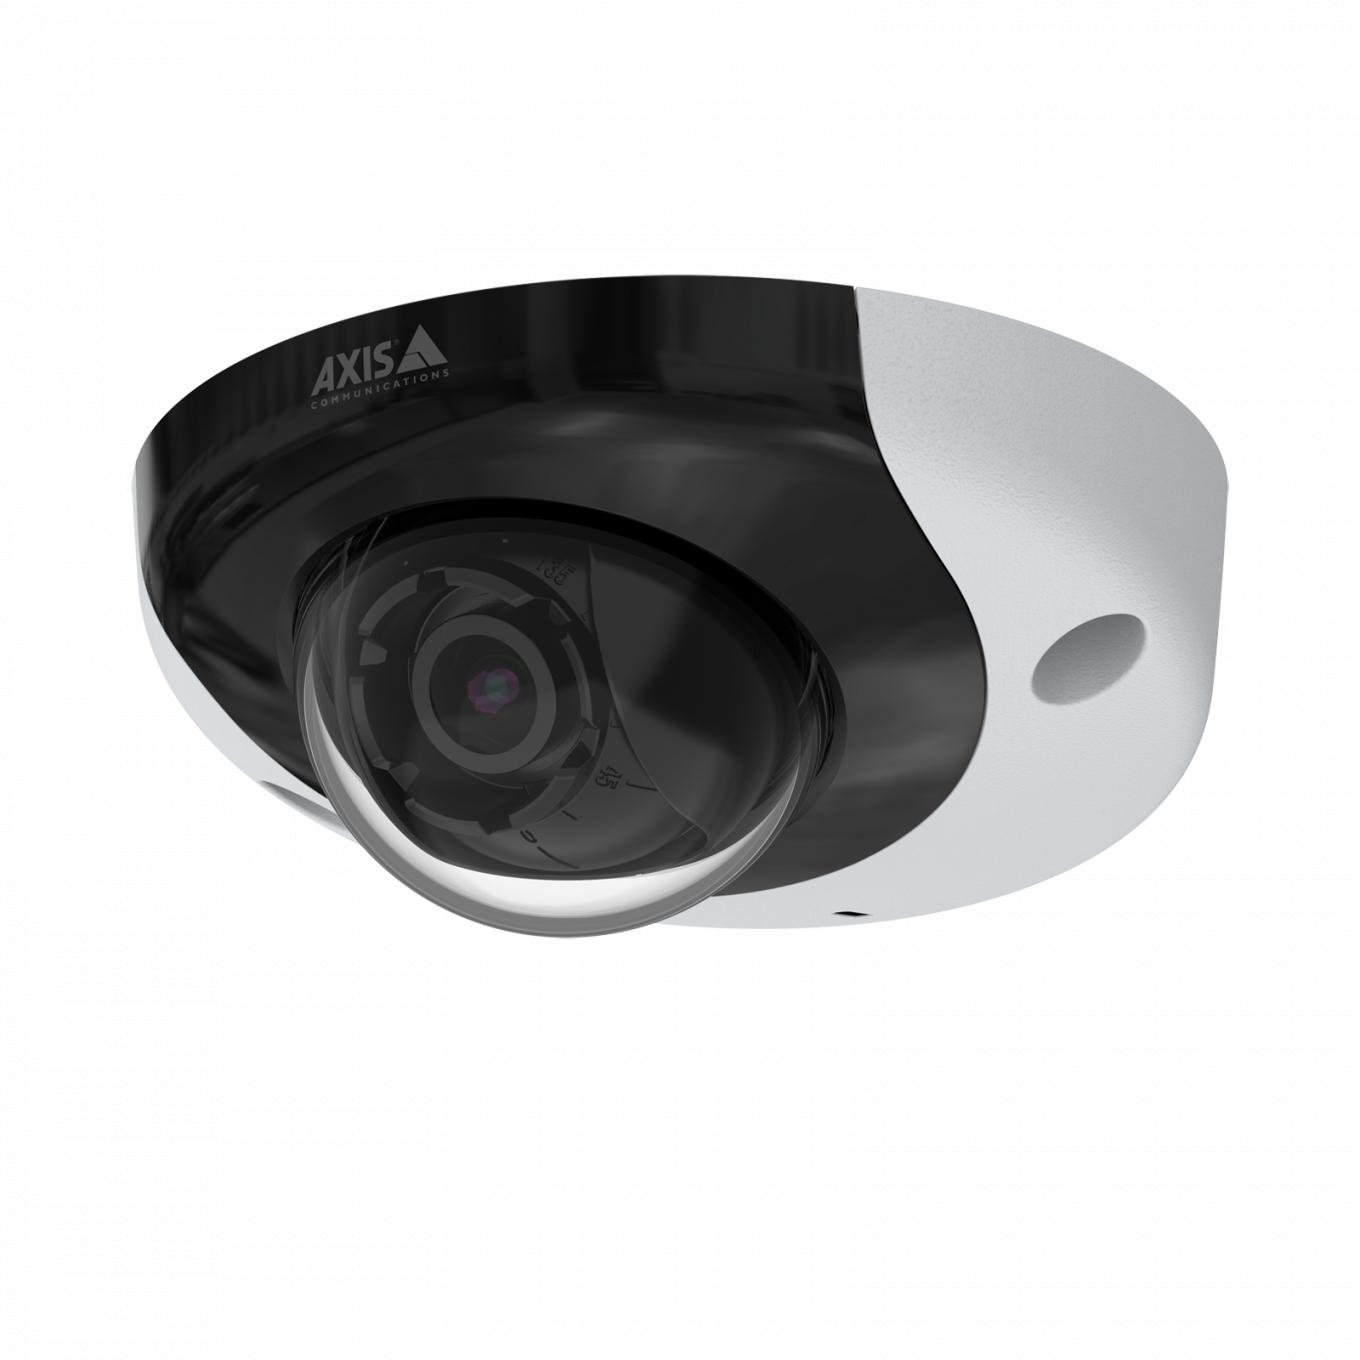 AXIS P3935-LR Network Camera | Axis Communications